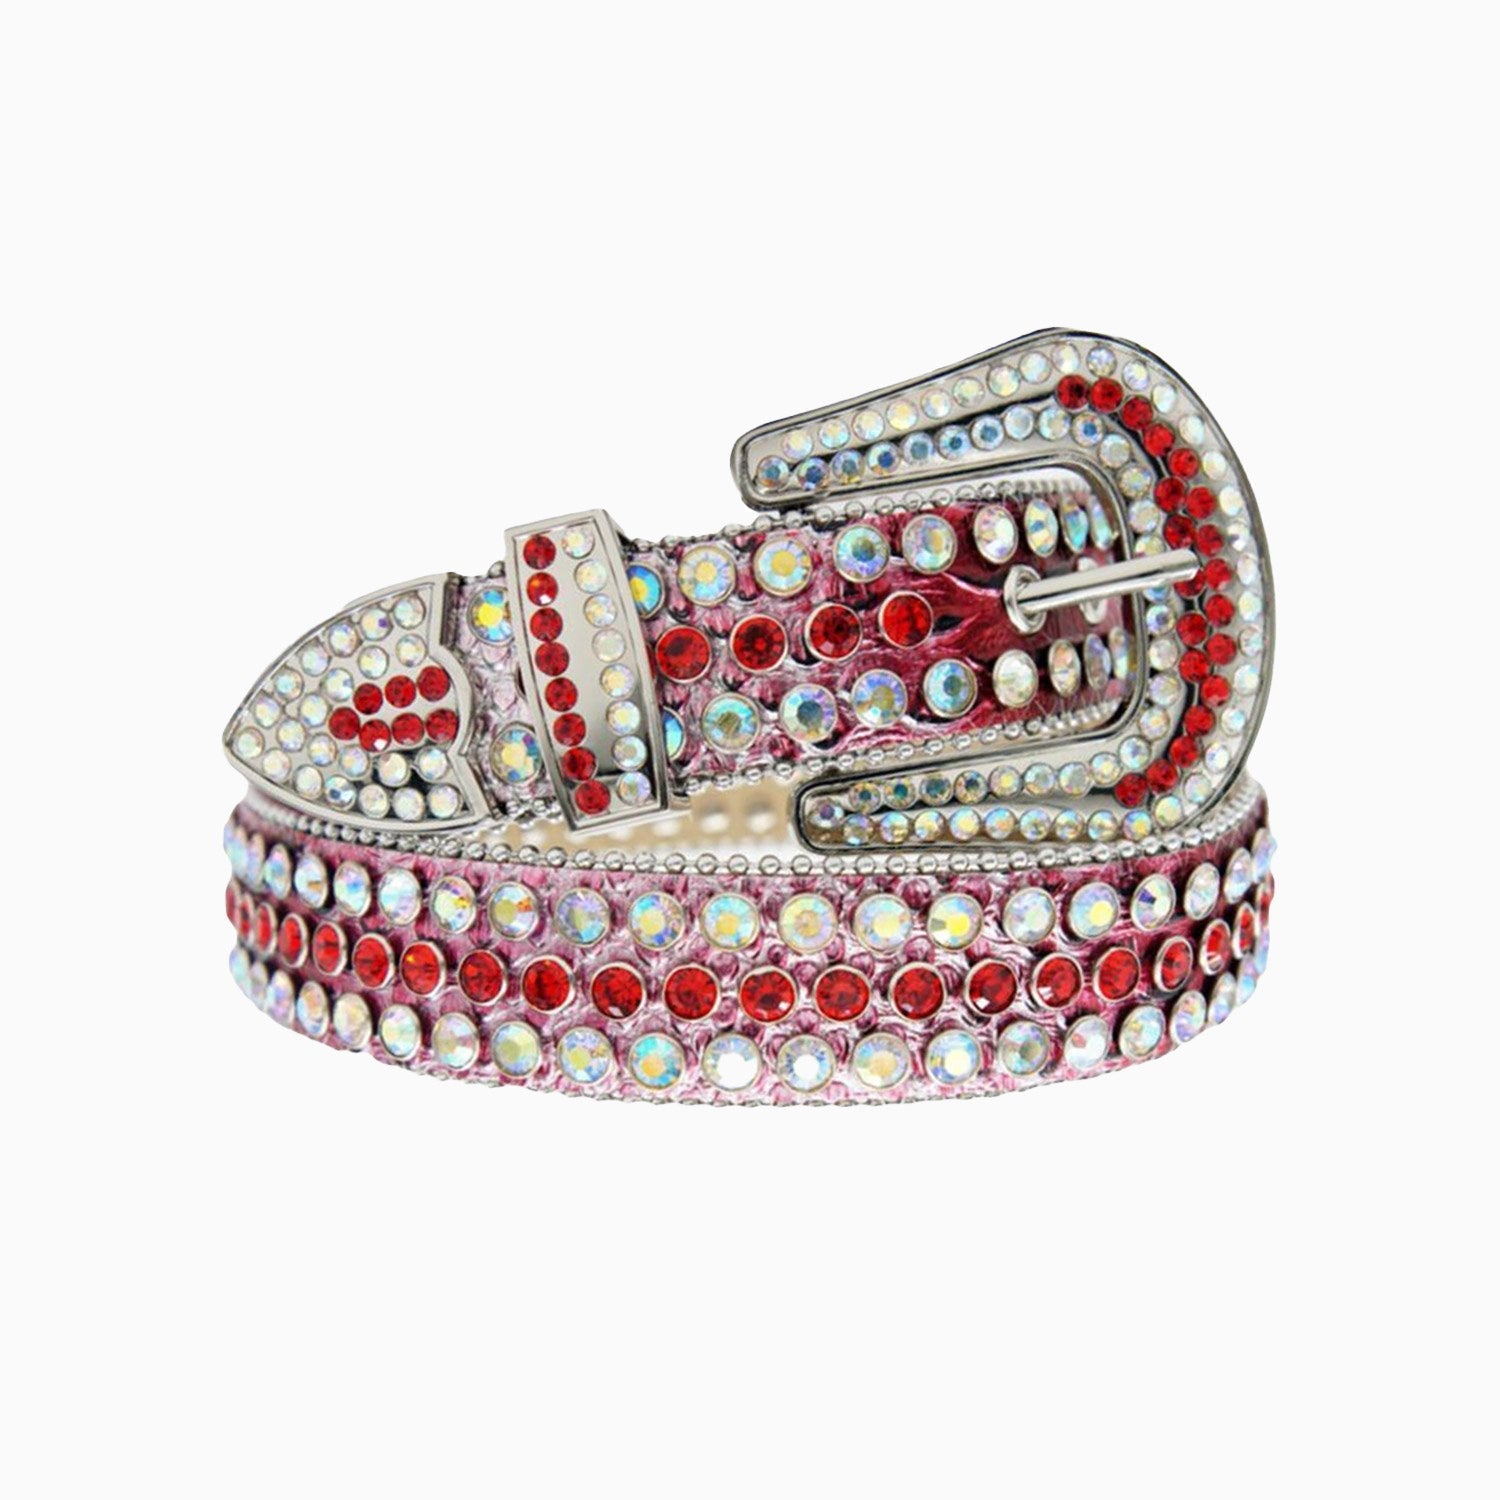 dna-premium-dna-belt-red-snake-leather-with-red-and-silver-stones-dna-174